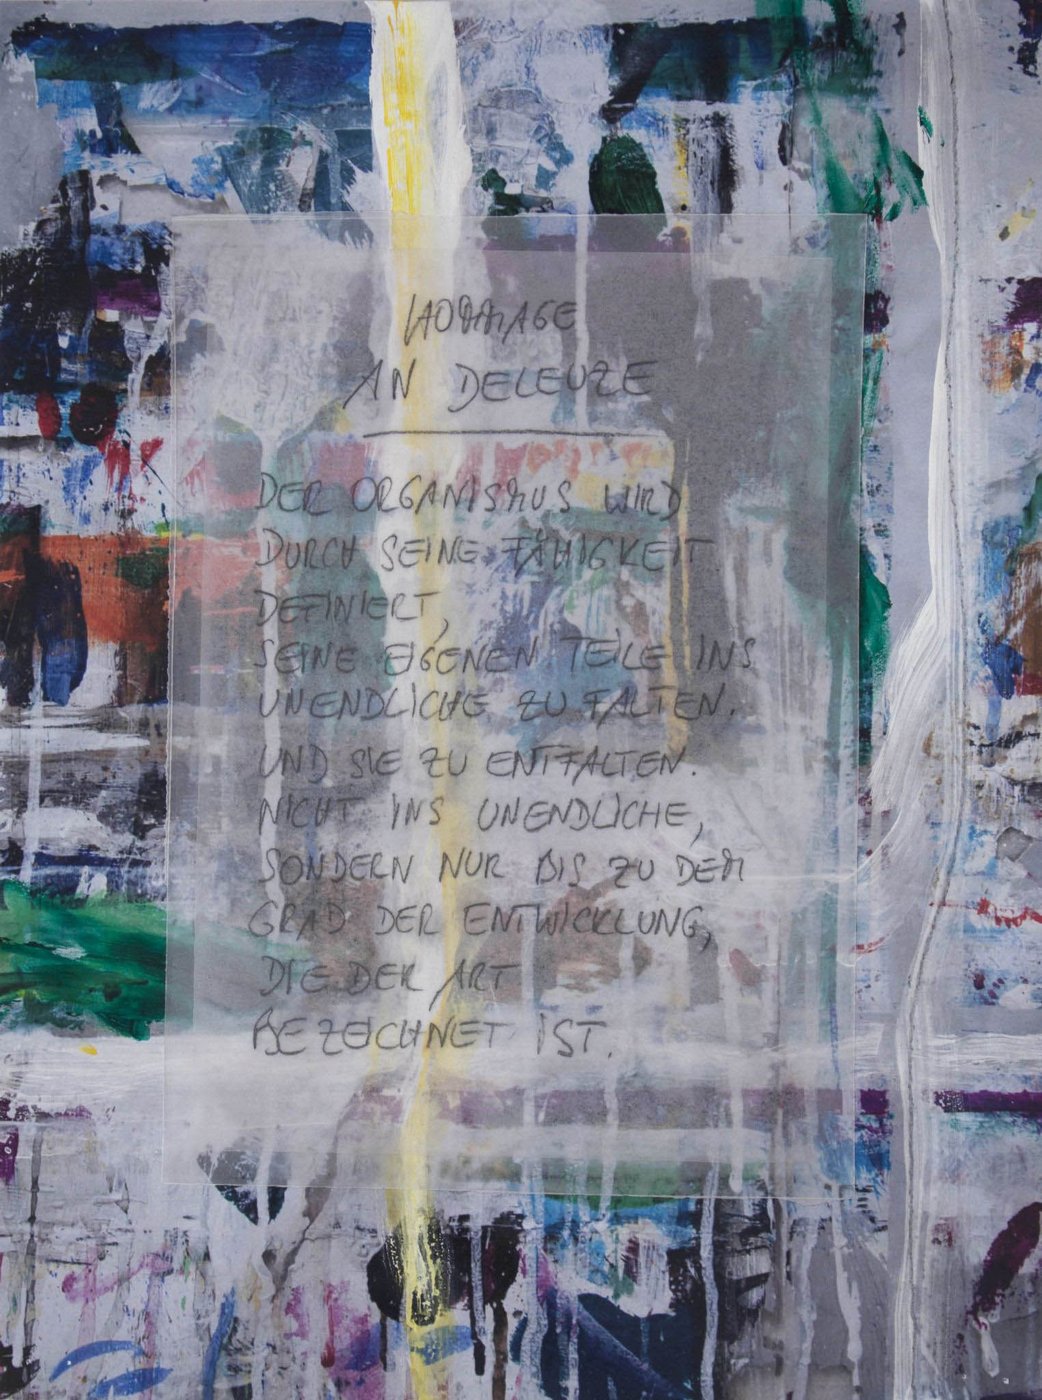 "Homage to Deleuze" is a portrait collage work in mixed media with abstract acrylic painting in primary colors and white. This is the text: "The organism is defined by its ability to fold its own parts into infinity. And to unfold them. Not to infinity, but only with to the degree of development designated to the species."